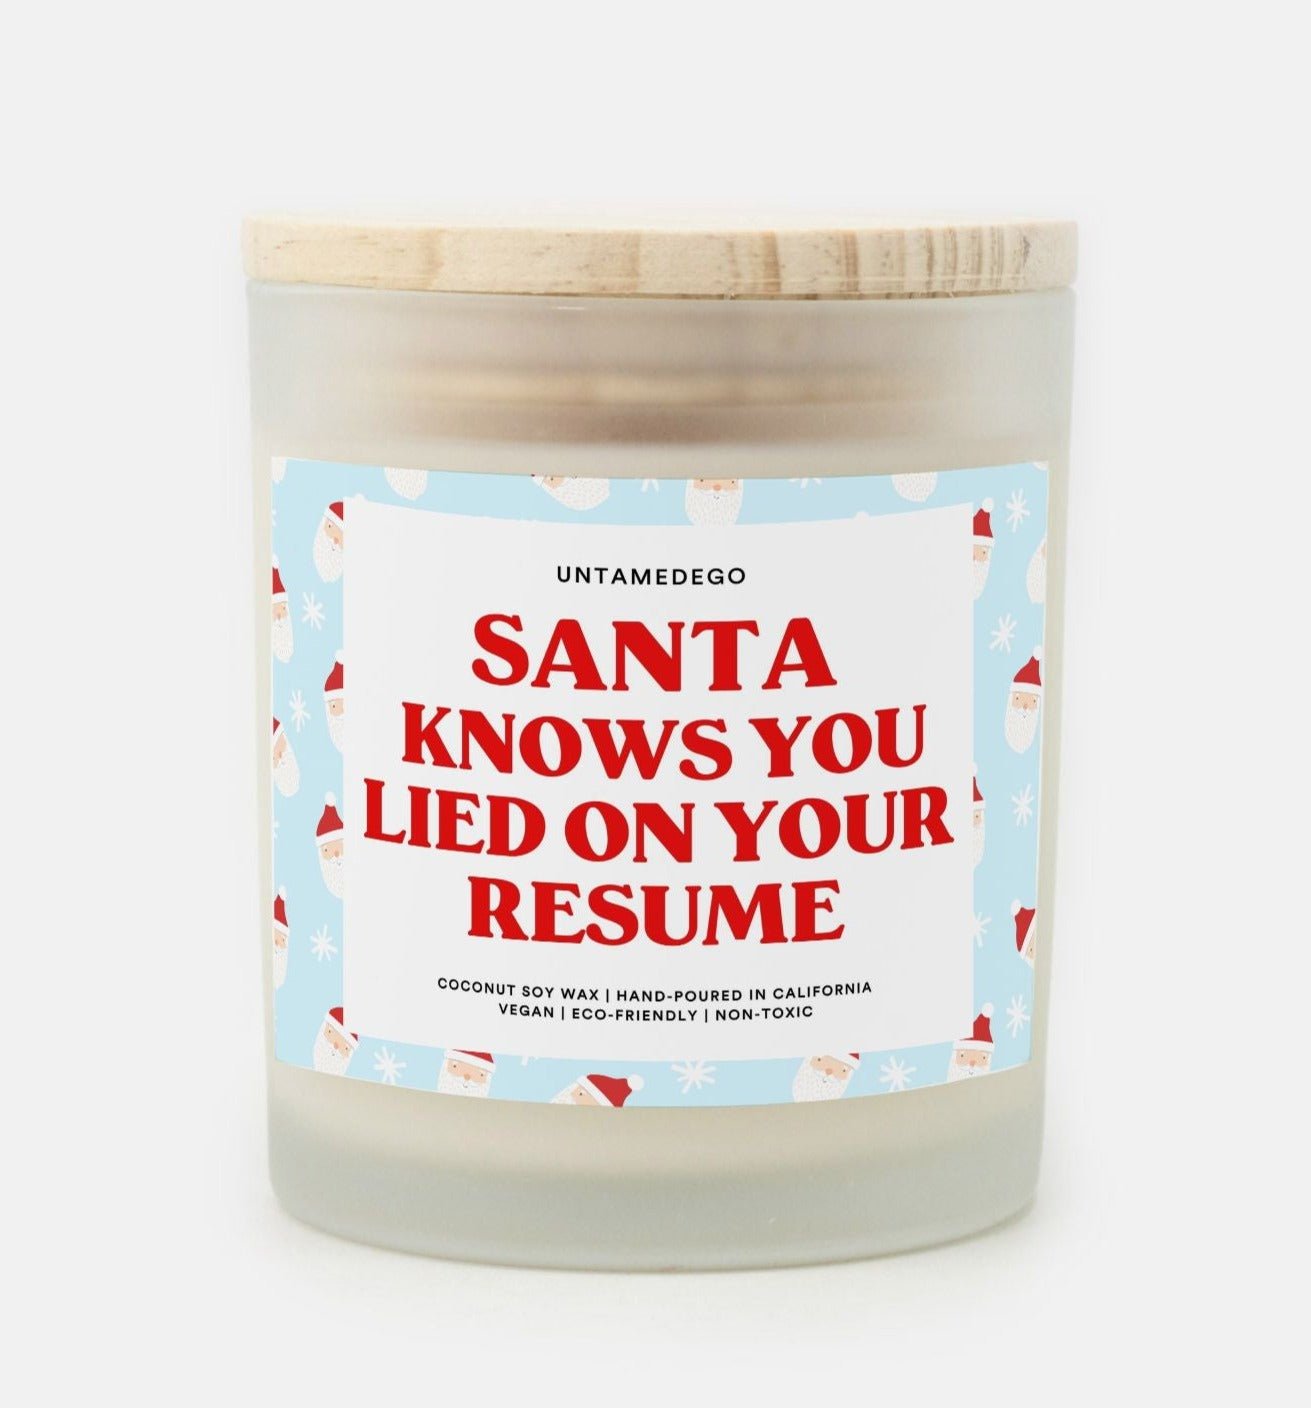 Santa Knows You Lied on Your Resume Frosted Glass Jar Candle - UntamedEgo LLC.